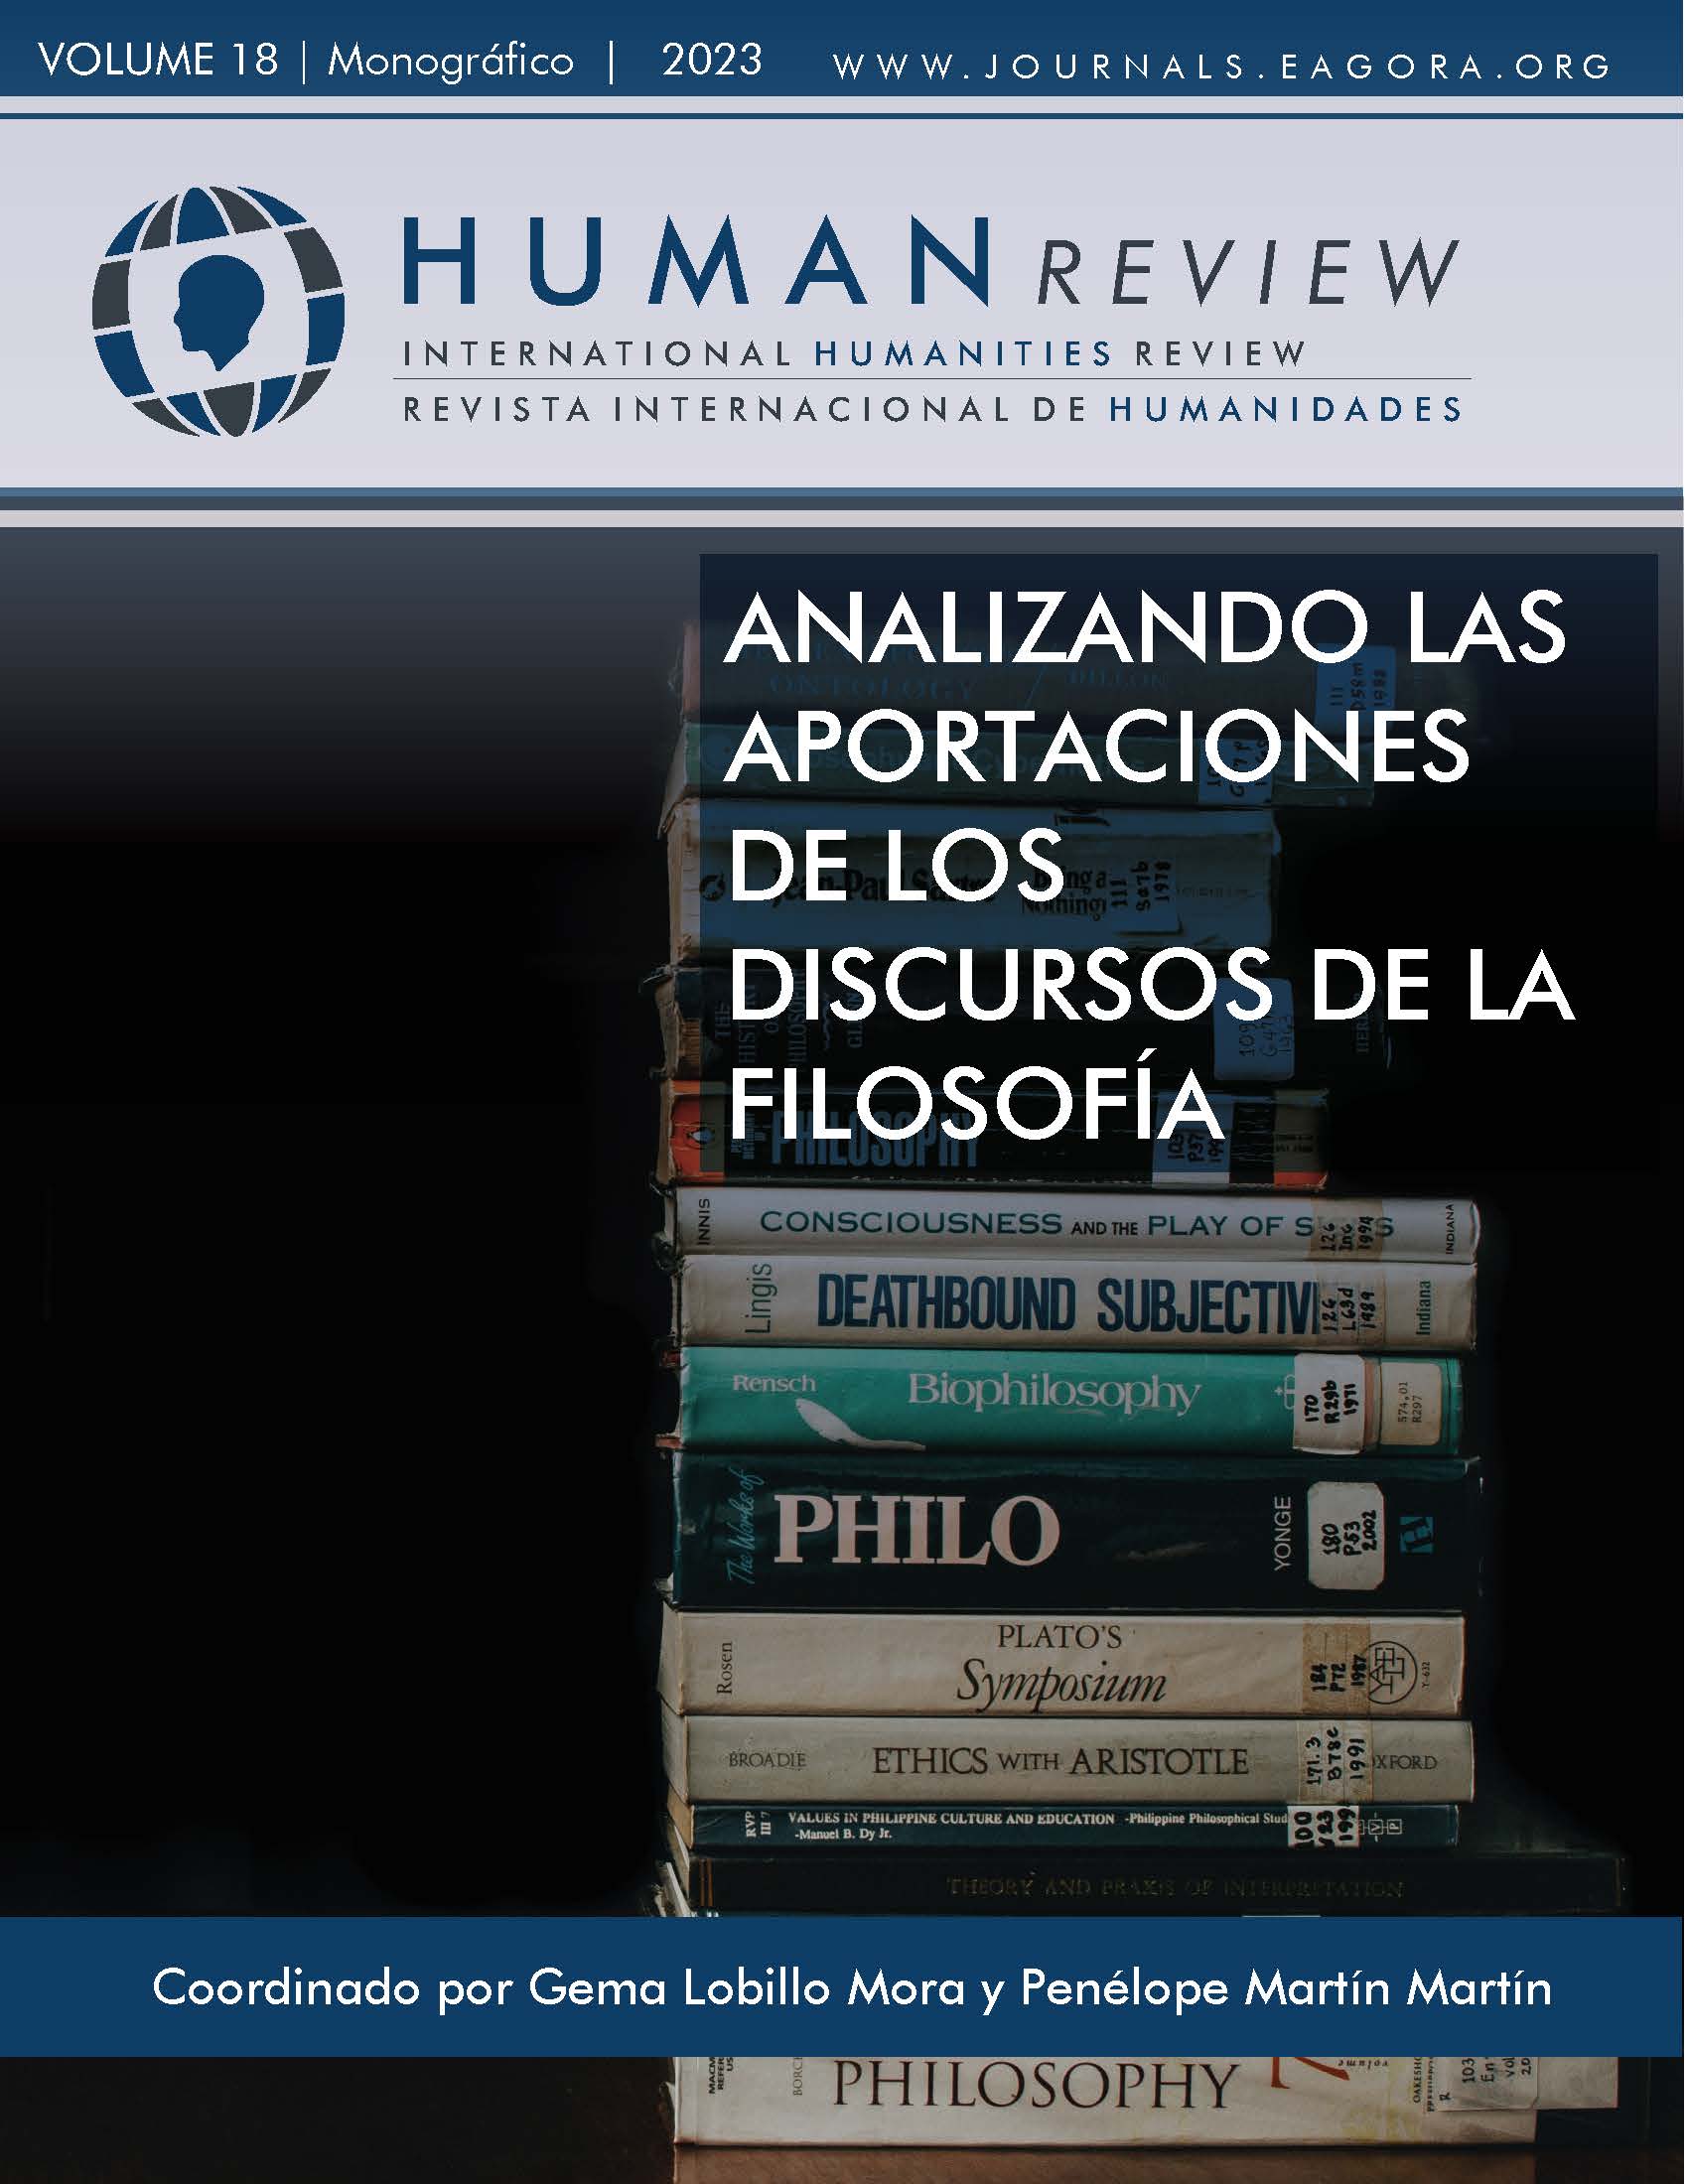 					View Vol. 18 No. 5 (2023): Monograph: "Analyzing the contributions of the discourses of philosophy"
				